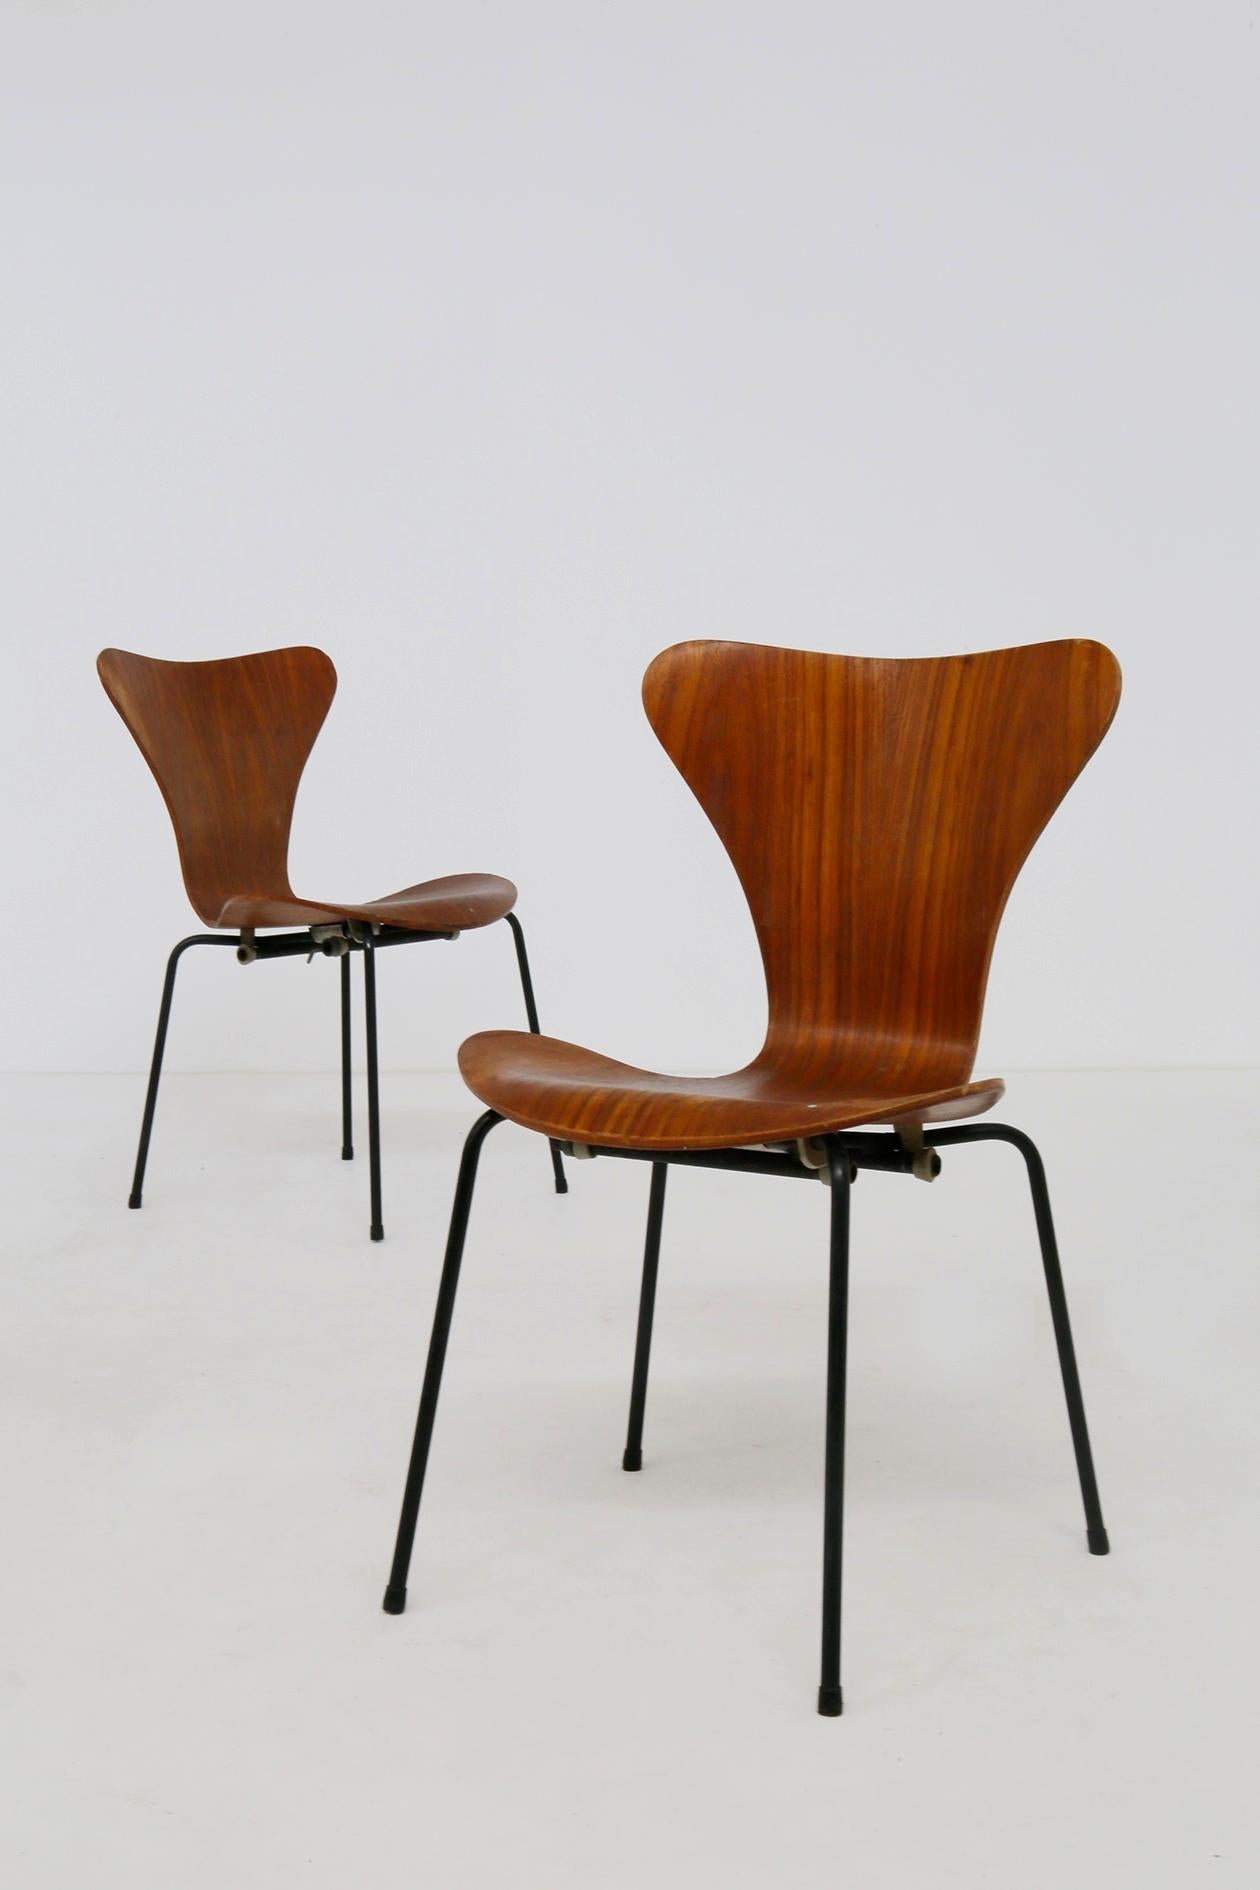 Set of Six Chairs by Arne Jacobsen M. Butterfly for the Brazilian Airline, 1950s For Sale 2